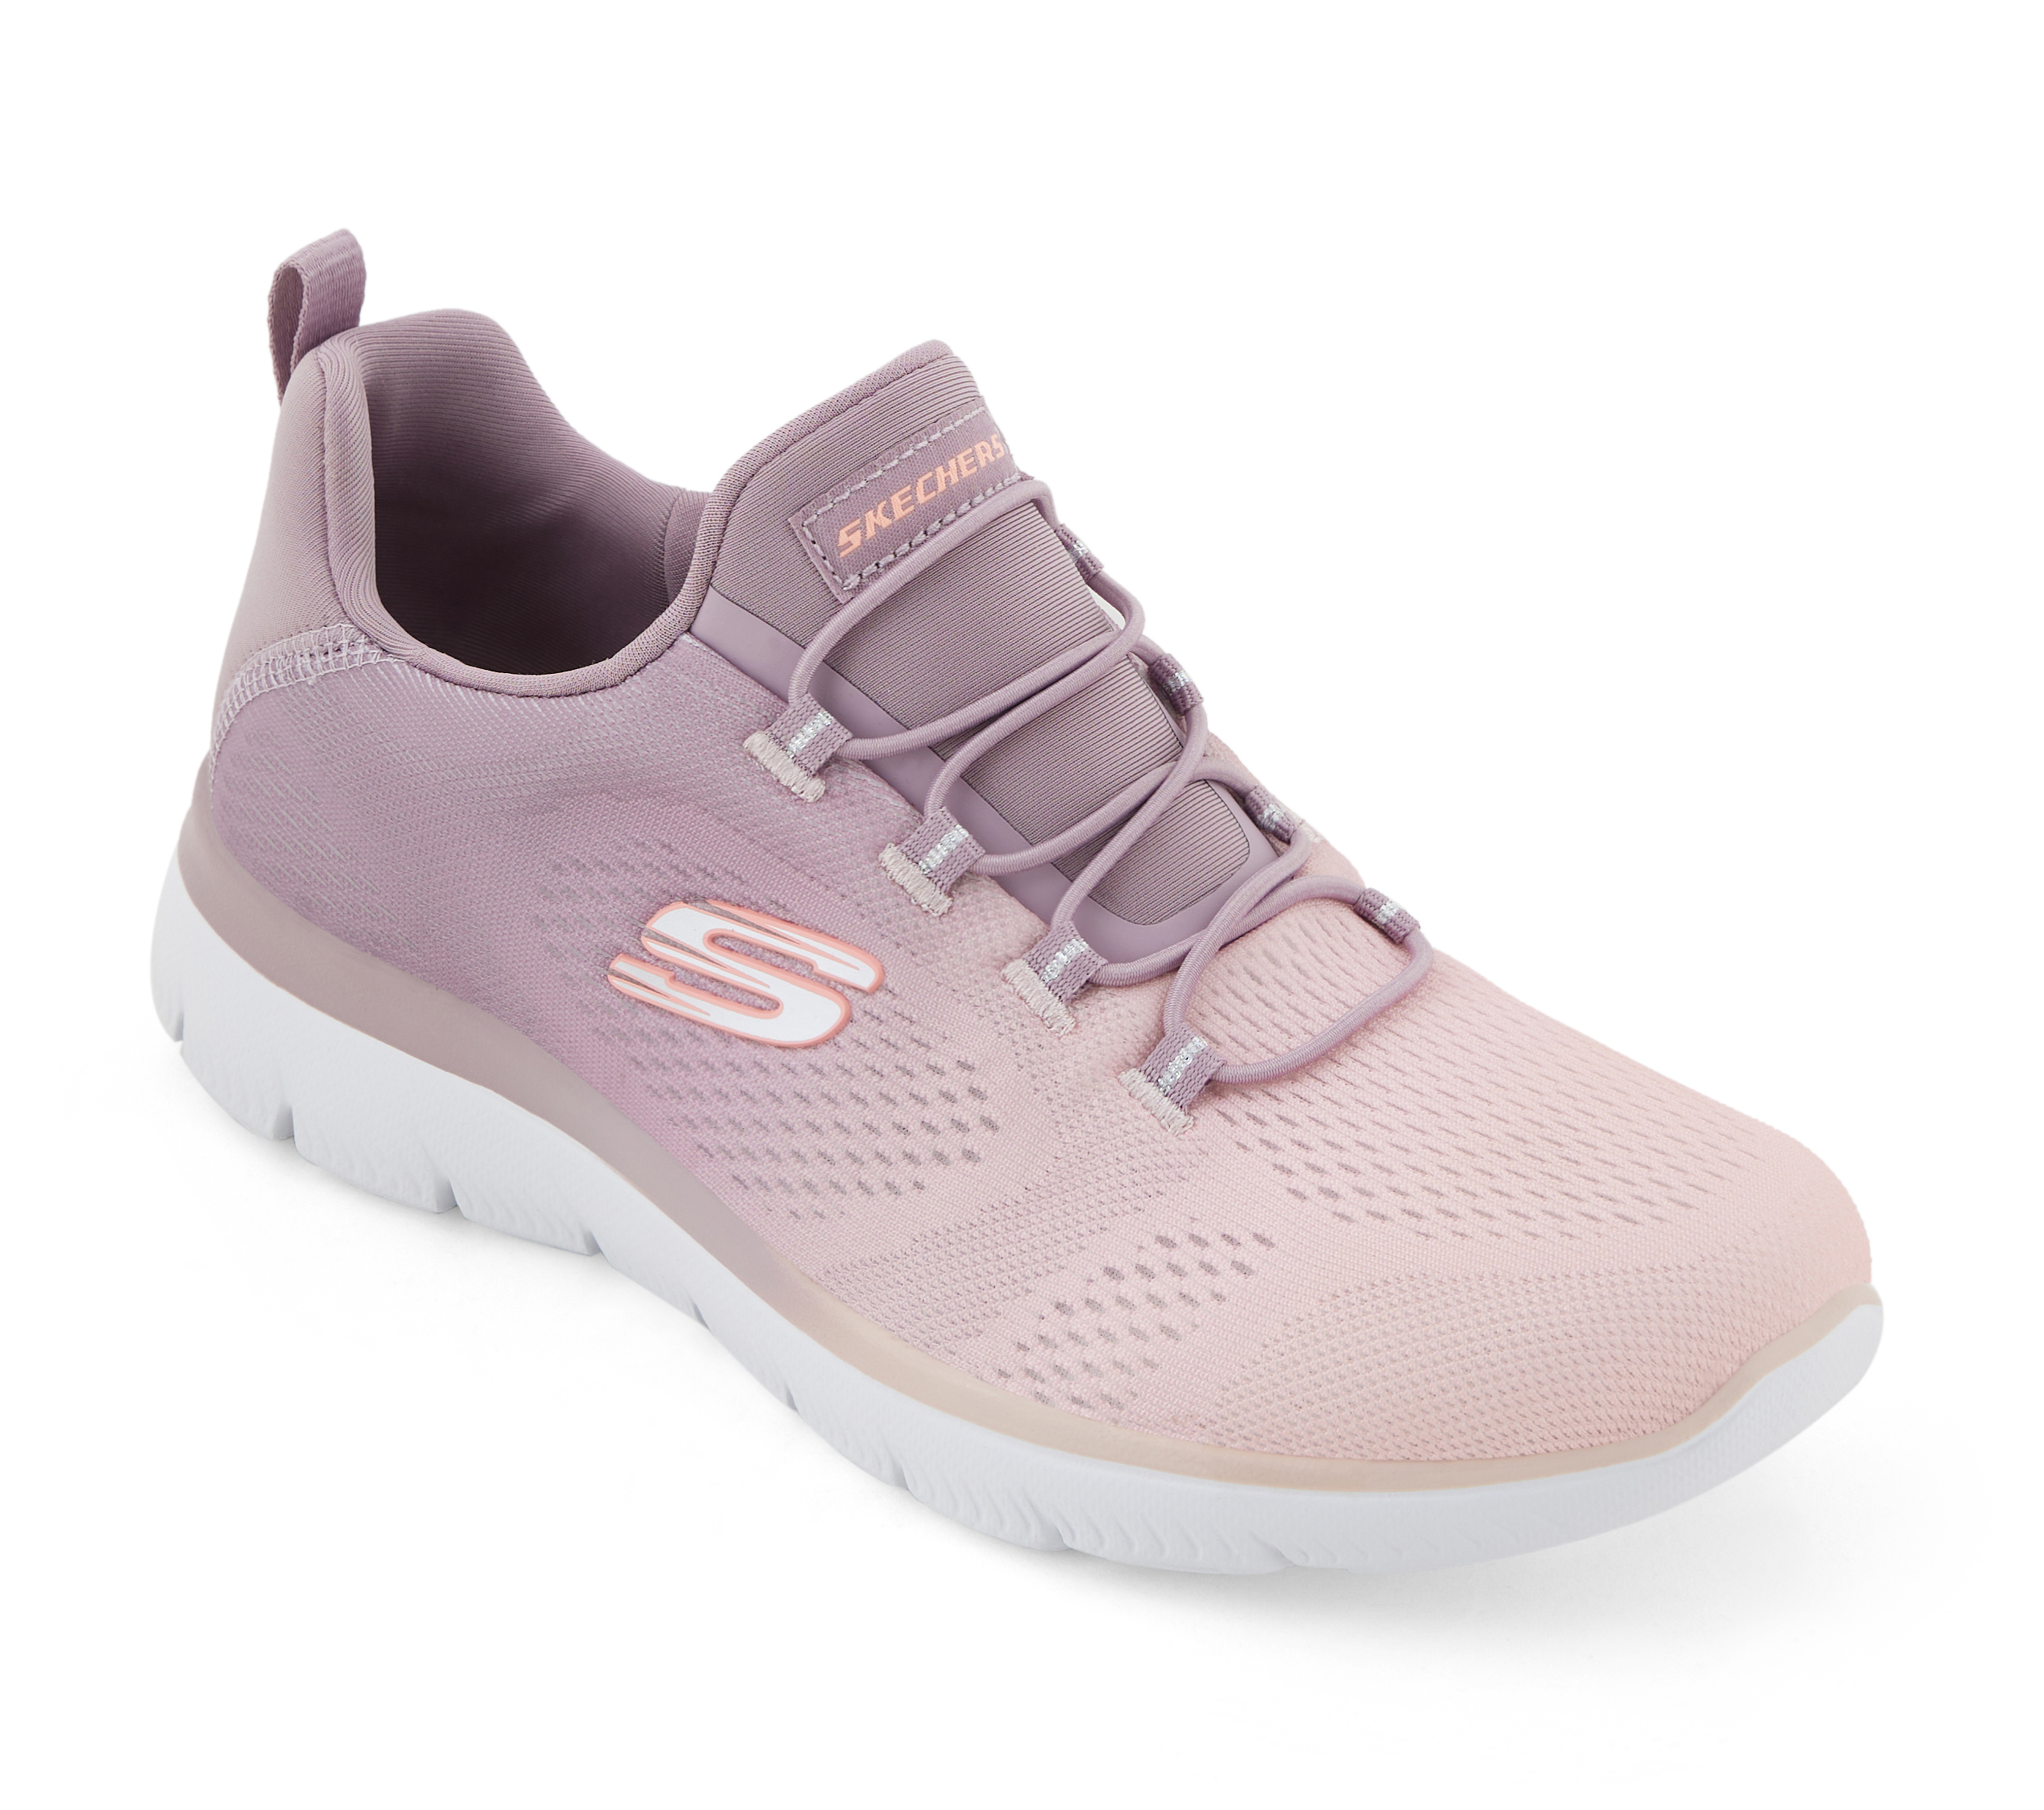 SUMMITS-BRIGHT CHARMER, LIGHT MAUVE Footwear Lateral View